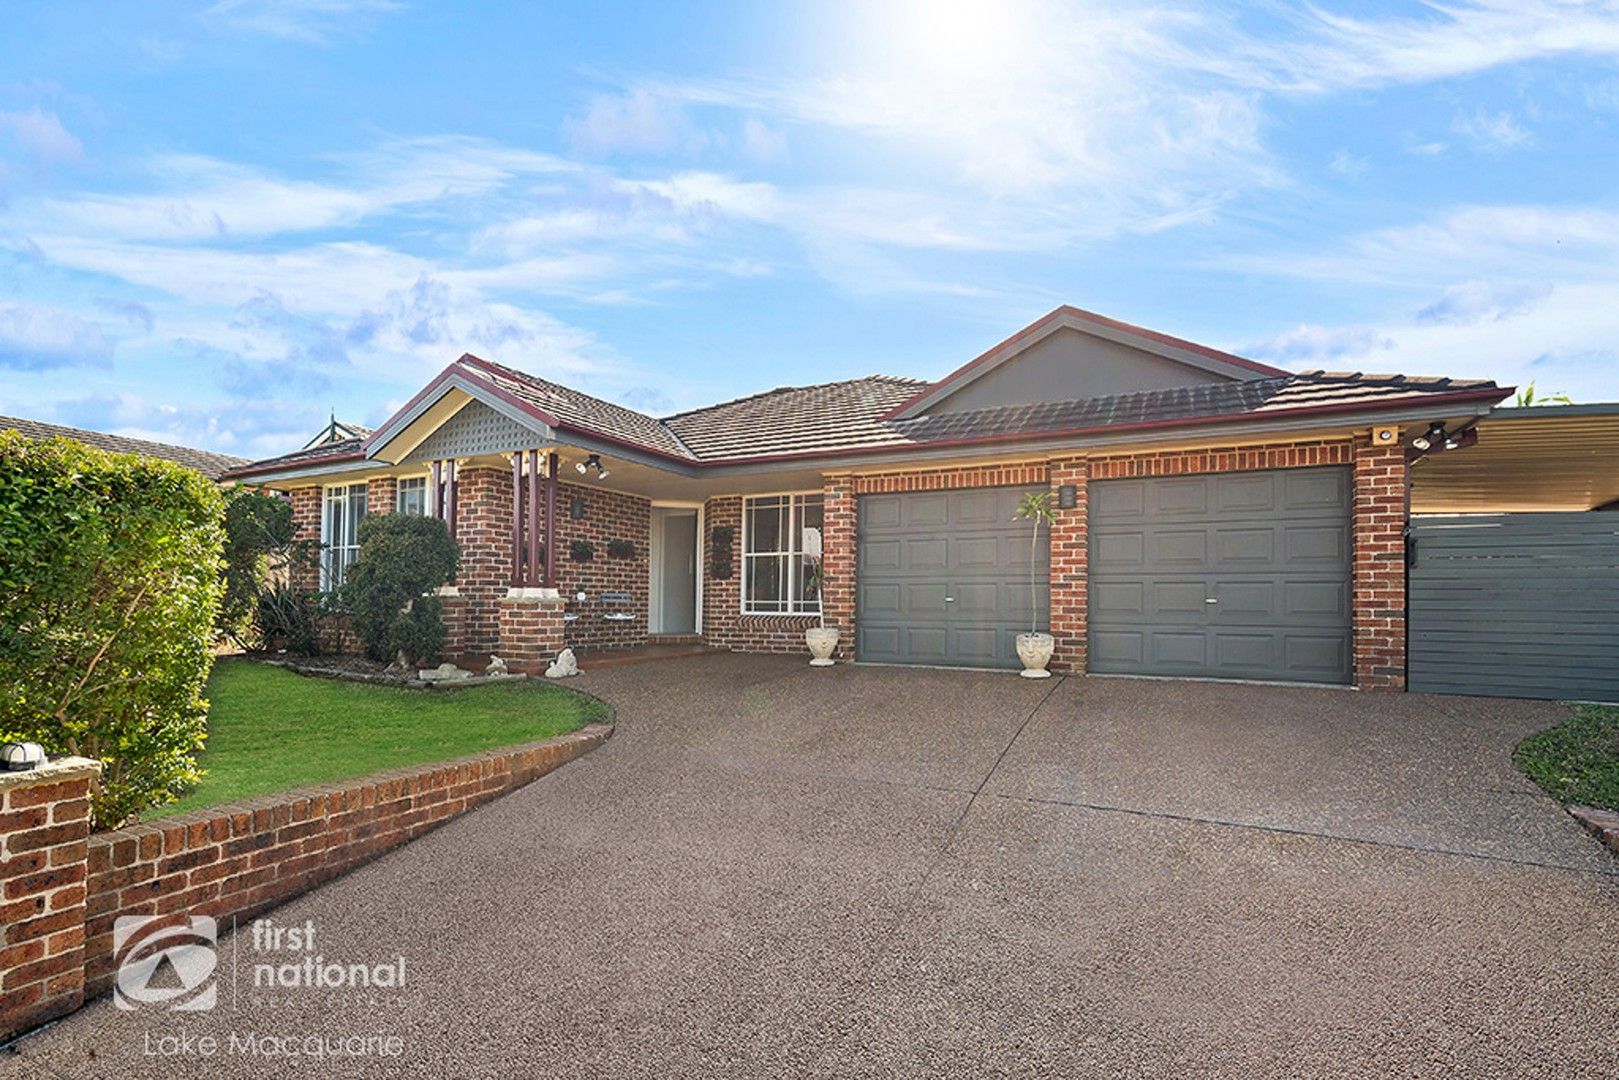 4 bedrooms House in 14 Crosbie Close MARYLAND NSW, 2287